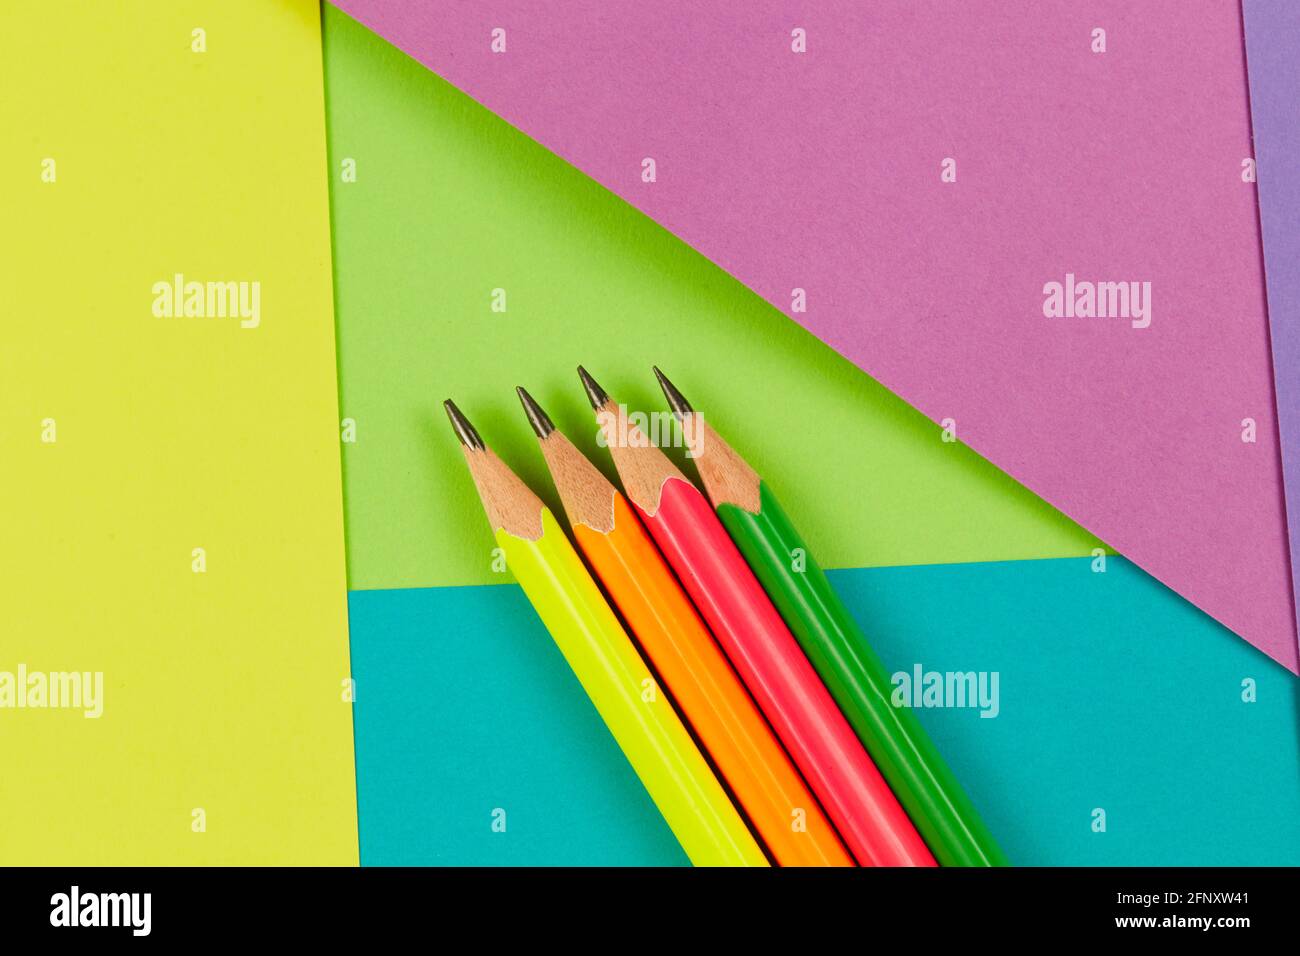 Pencils on a colorful background. Colorful school background concept. Stock Photo